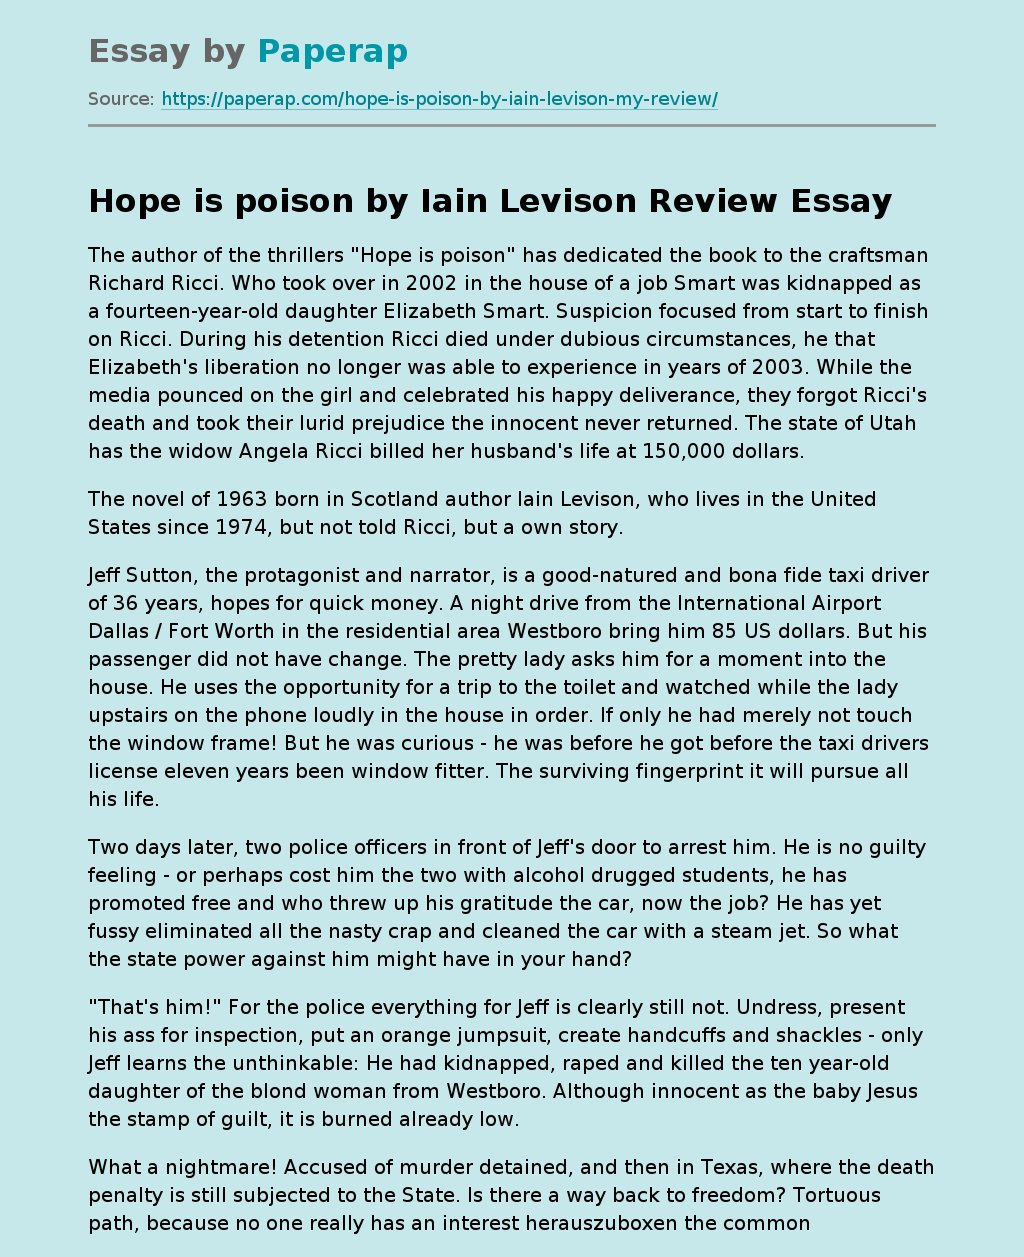 Hope is poison by Iain Levison Review